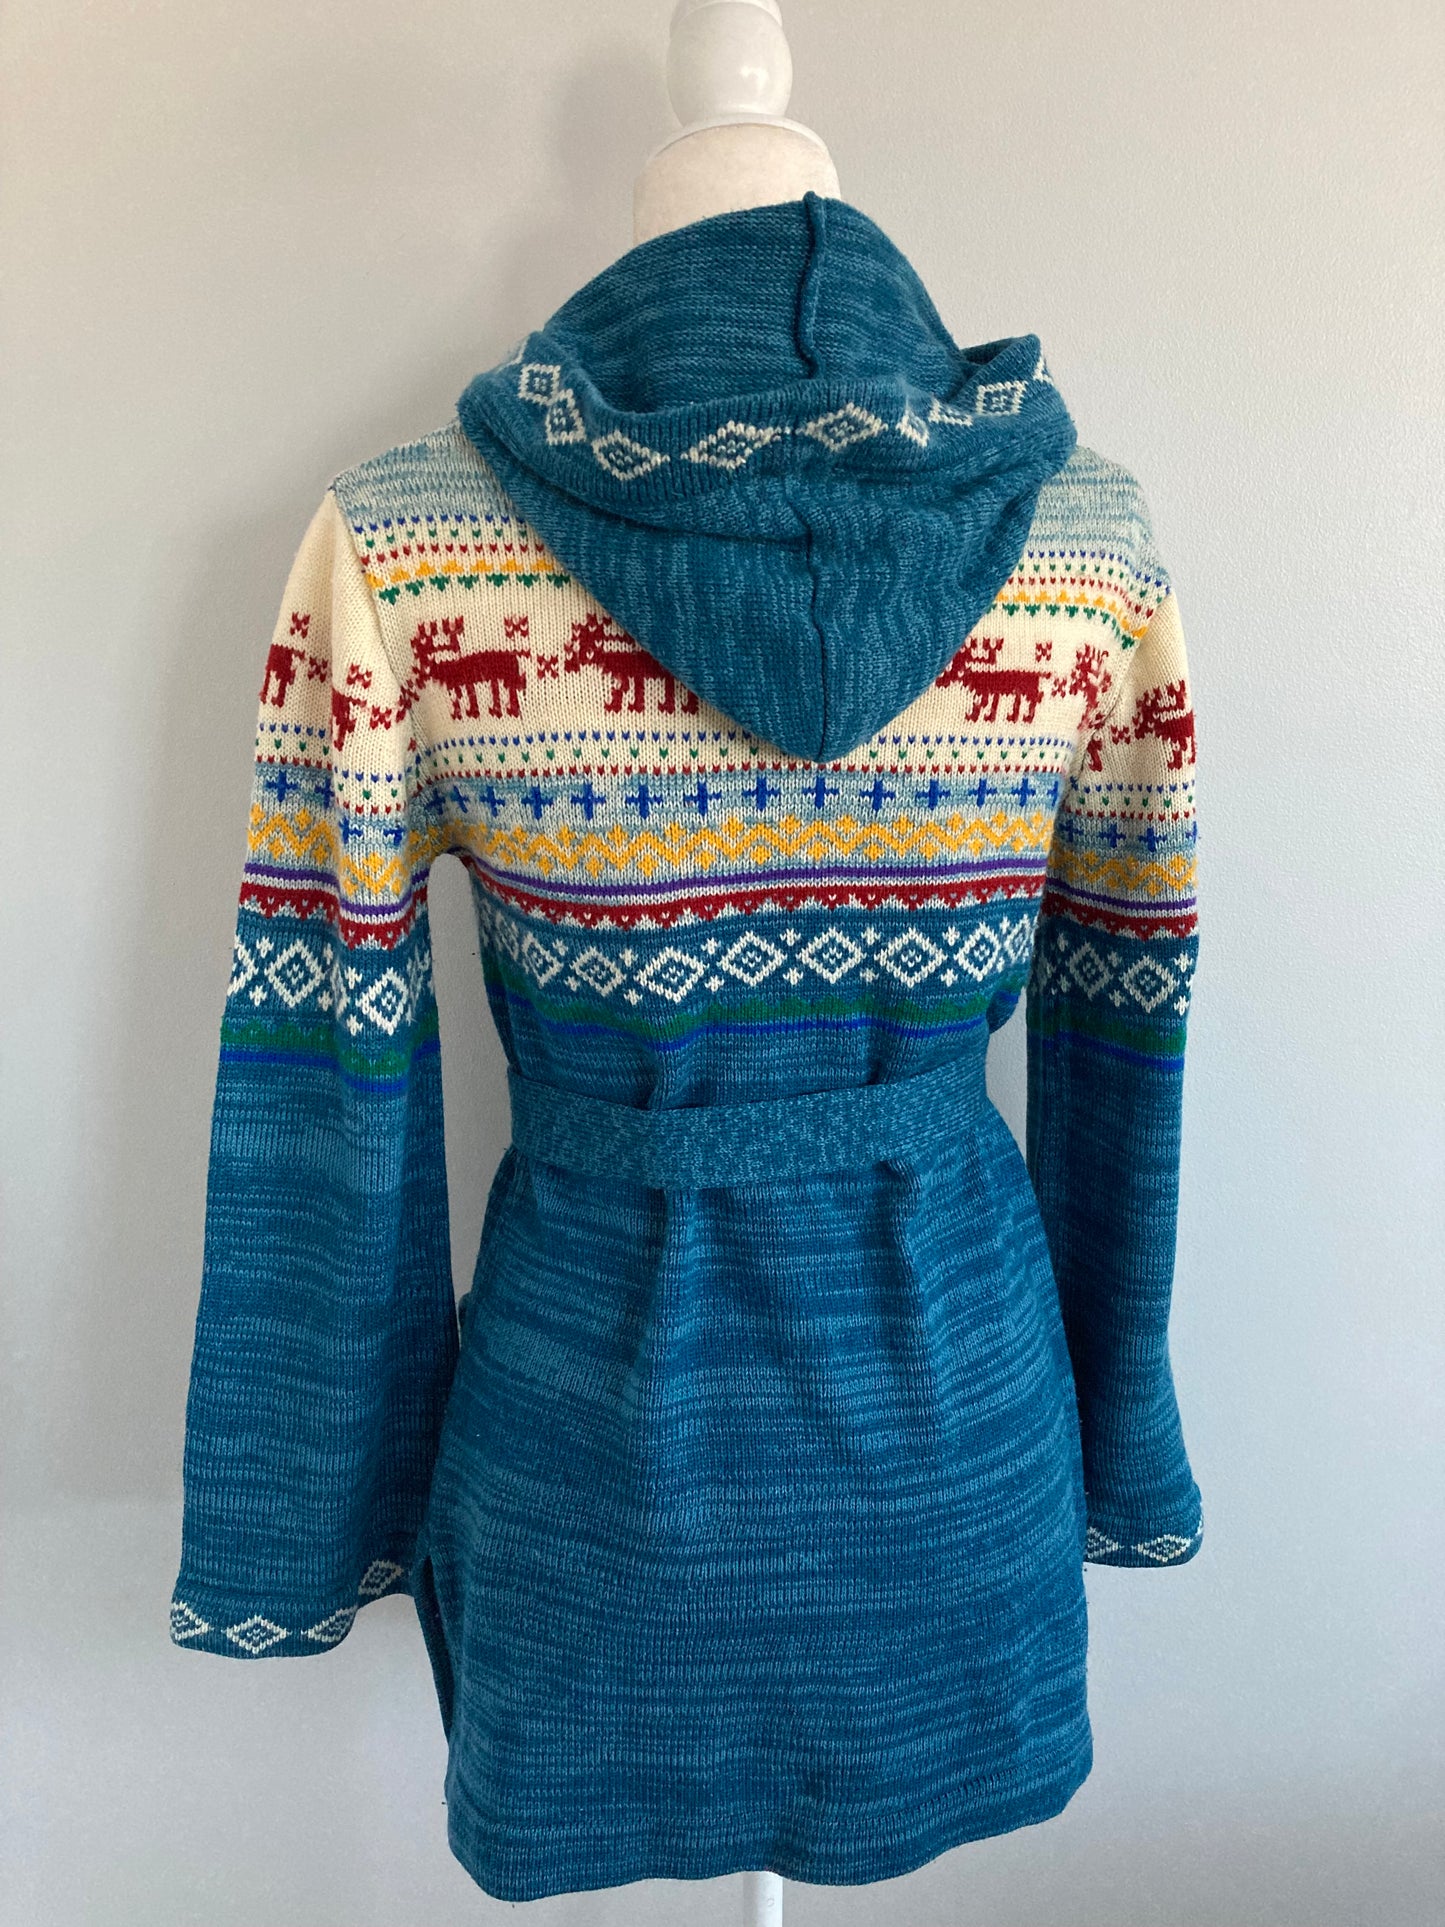 1970s Hooded Bell Sleeve Sweater, Size M